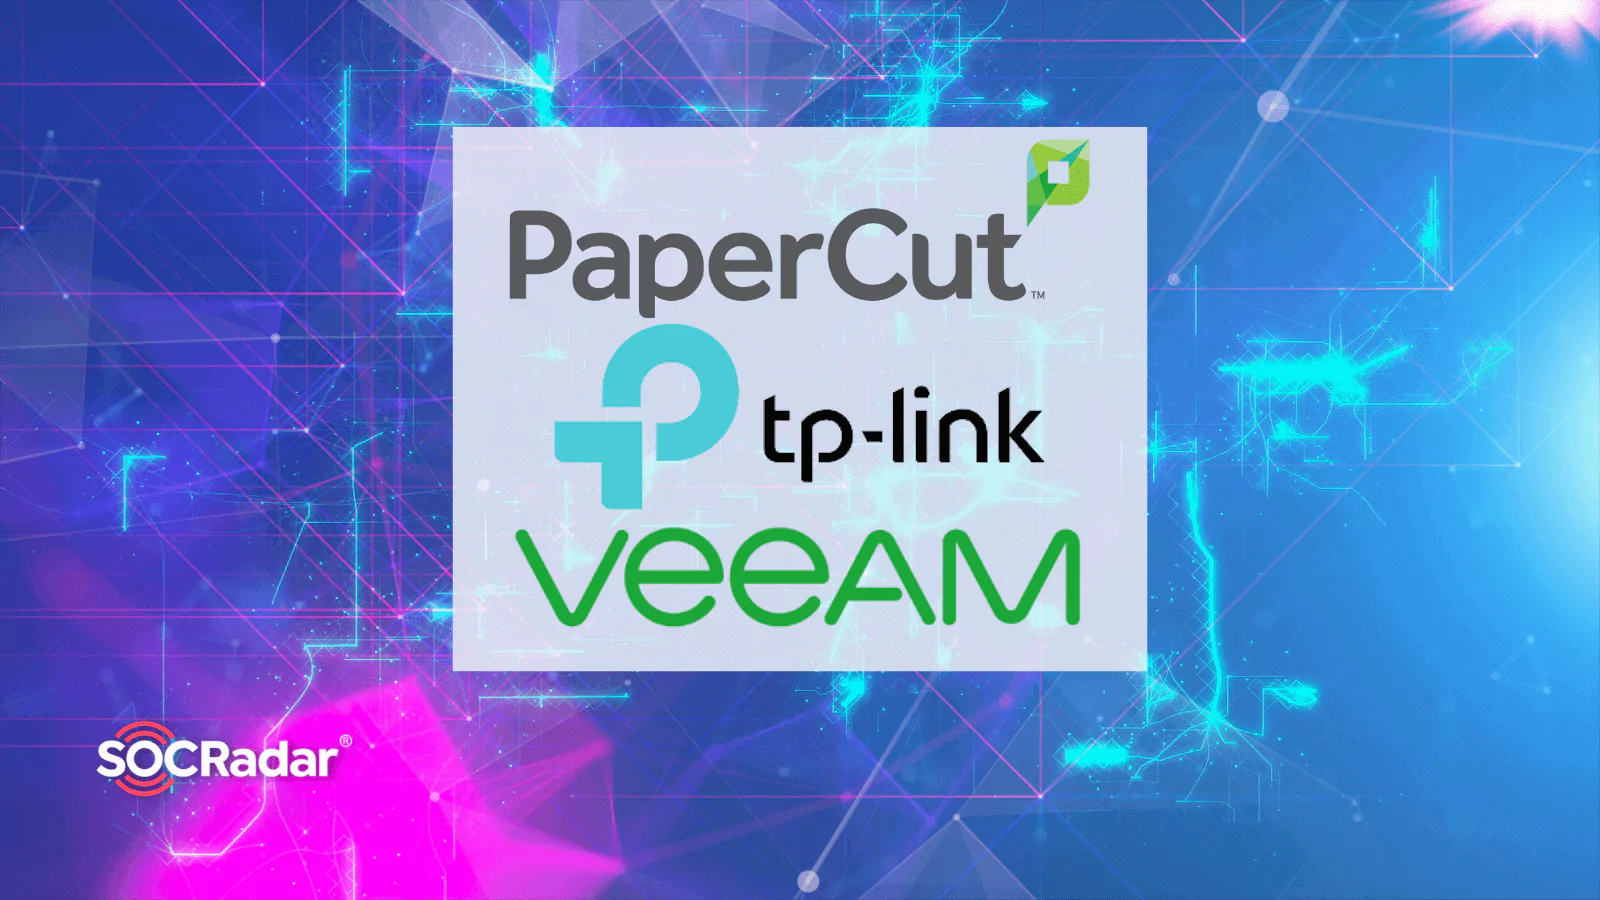 SOCRadar® Cyber Intelligence Inc. | Active Exploitation of Serious Vulnerabilities in PaperCut, Veeam, and TP-Link